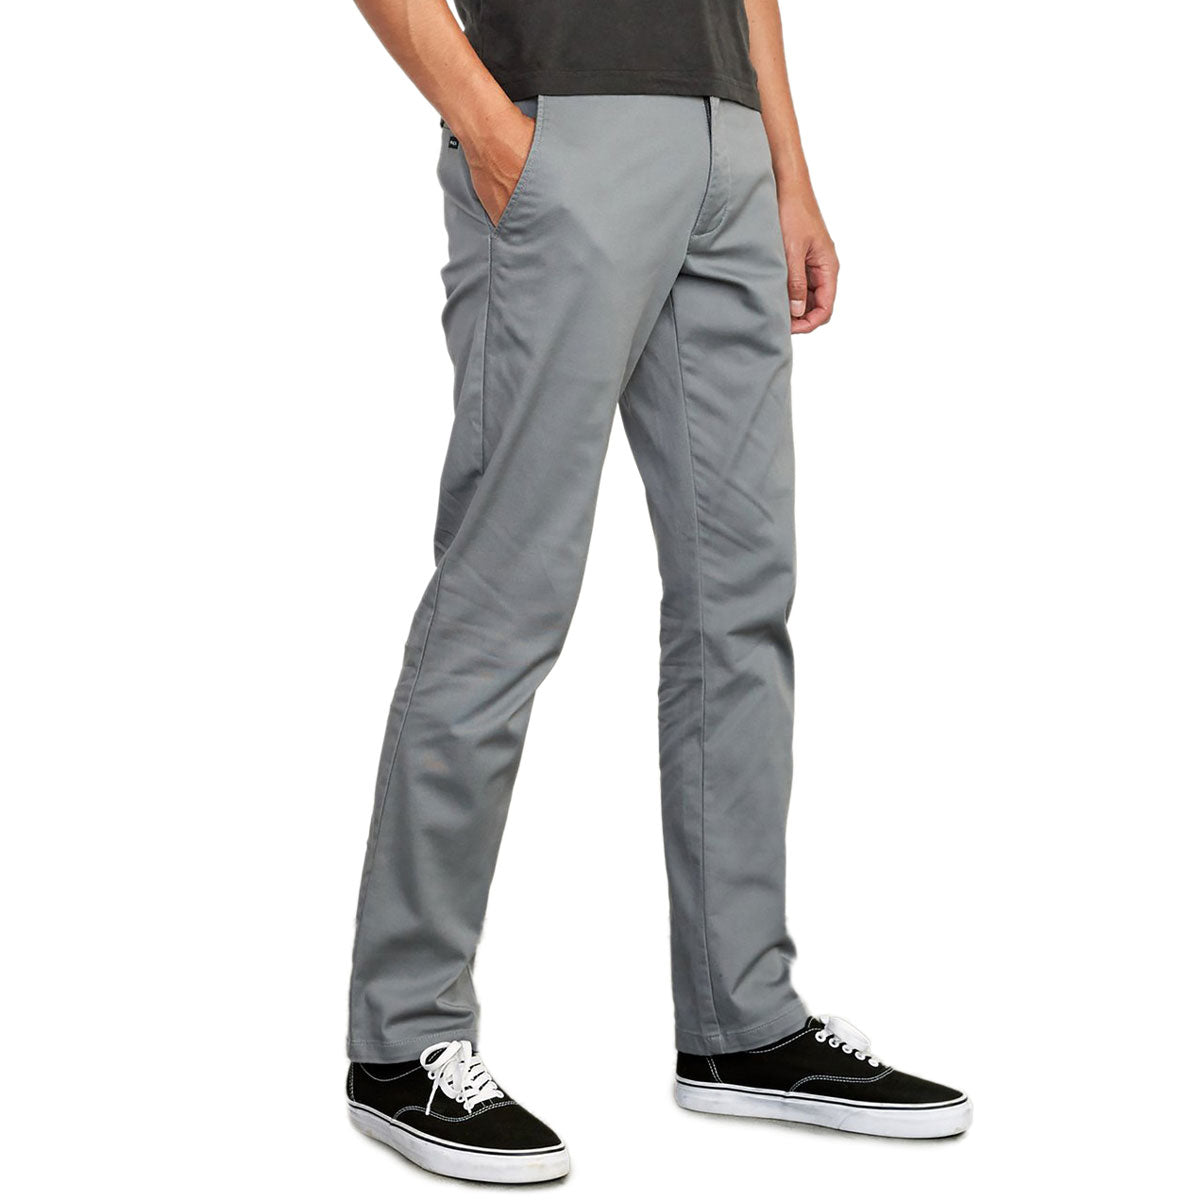 RVCA Weekend Stretch Pants - Smoked image 1